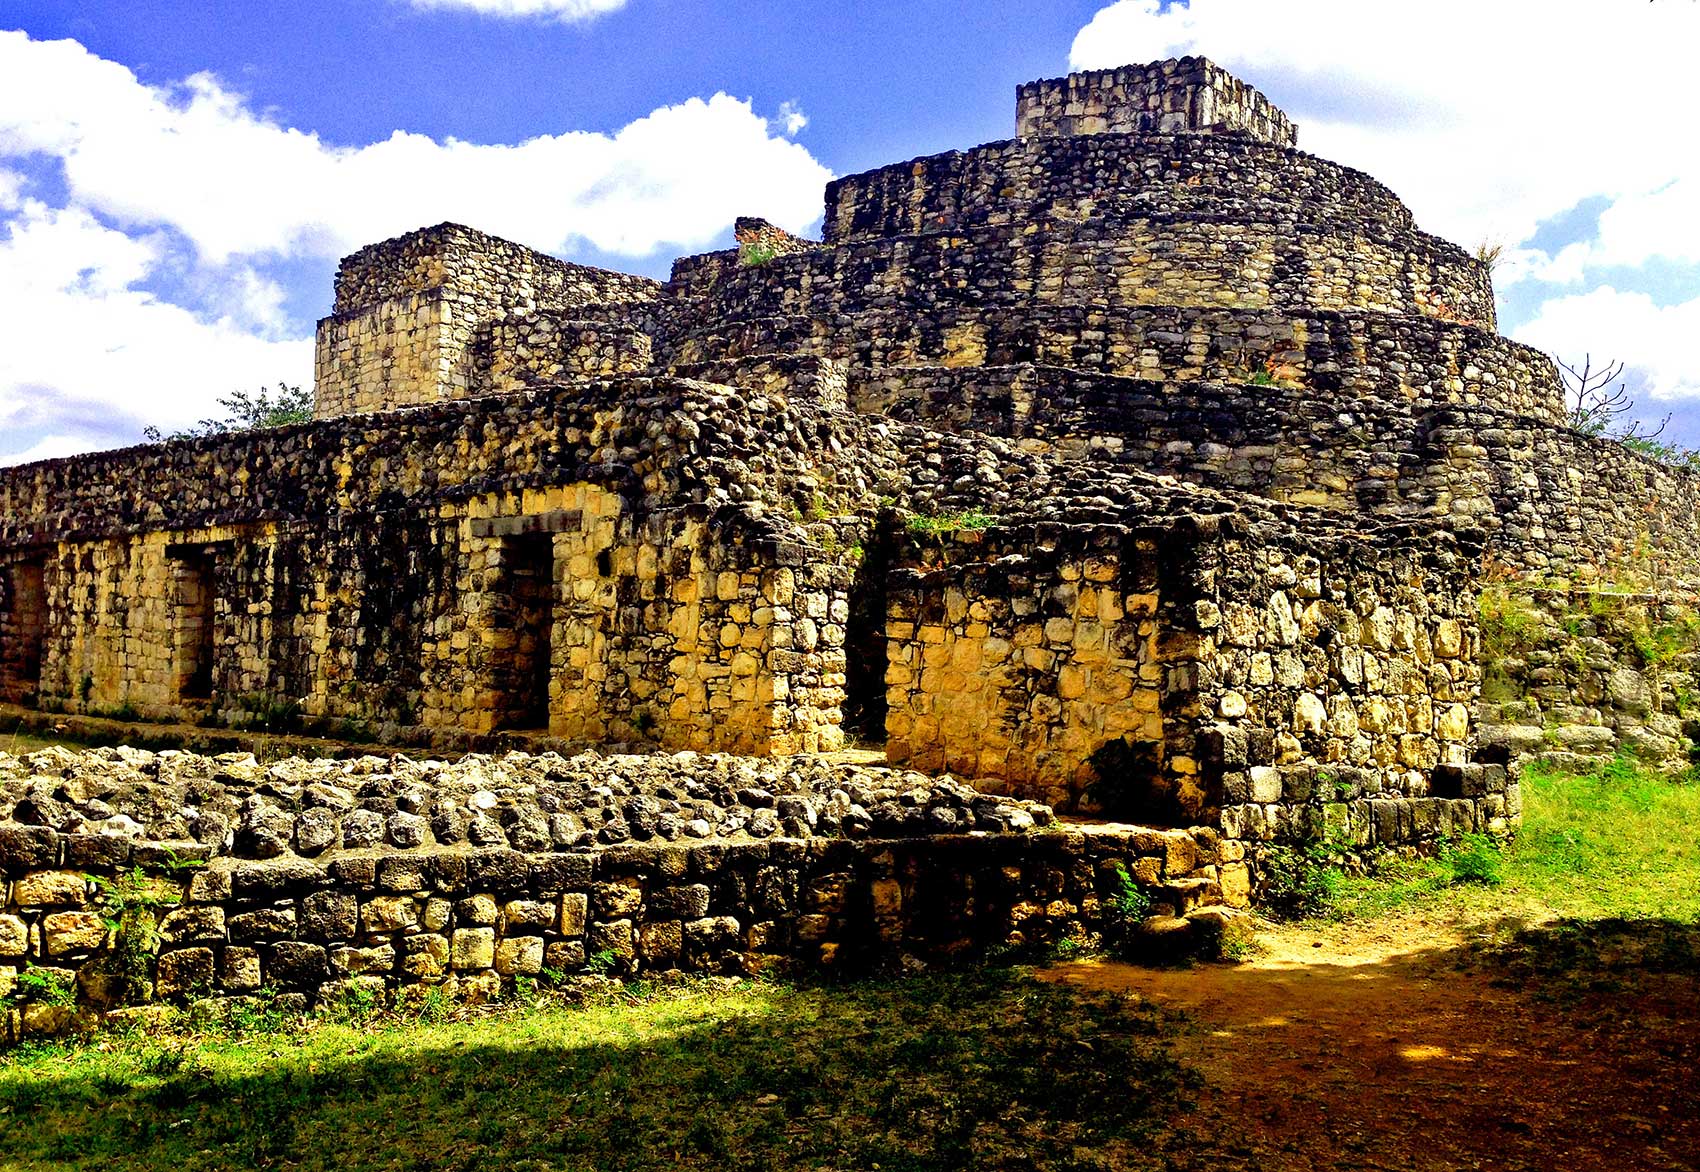 LDS Tour E. Ek Balam Ruins and Cenote | Goup Discount Rate $155.00 US. dollars per person